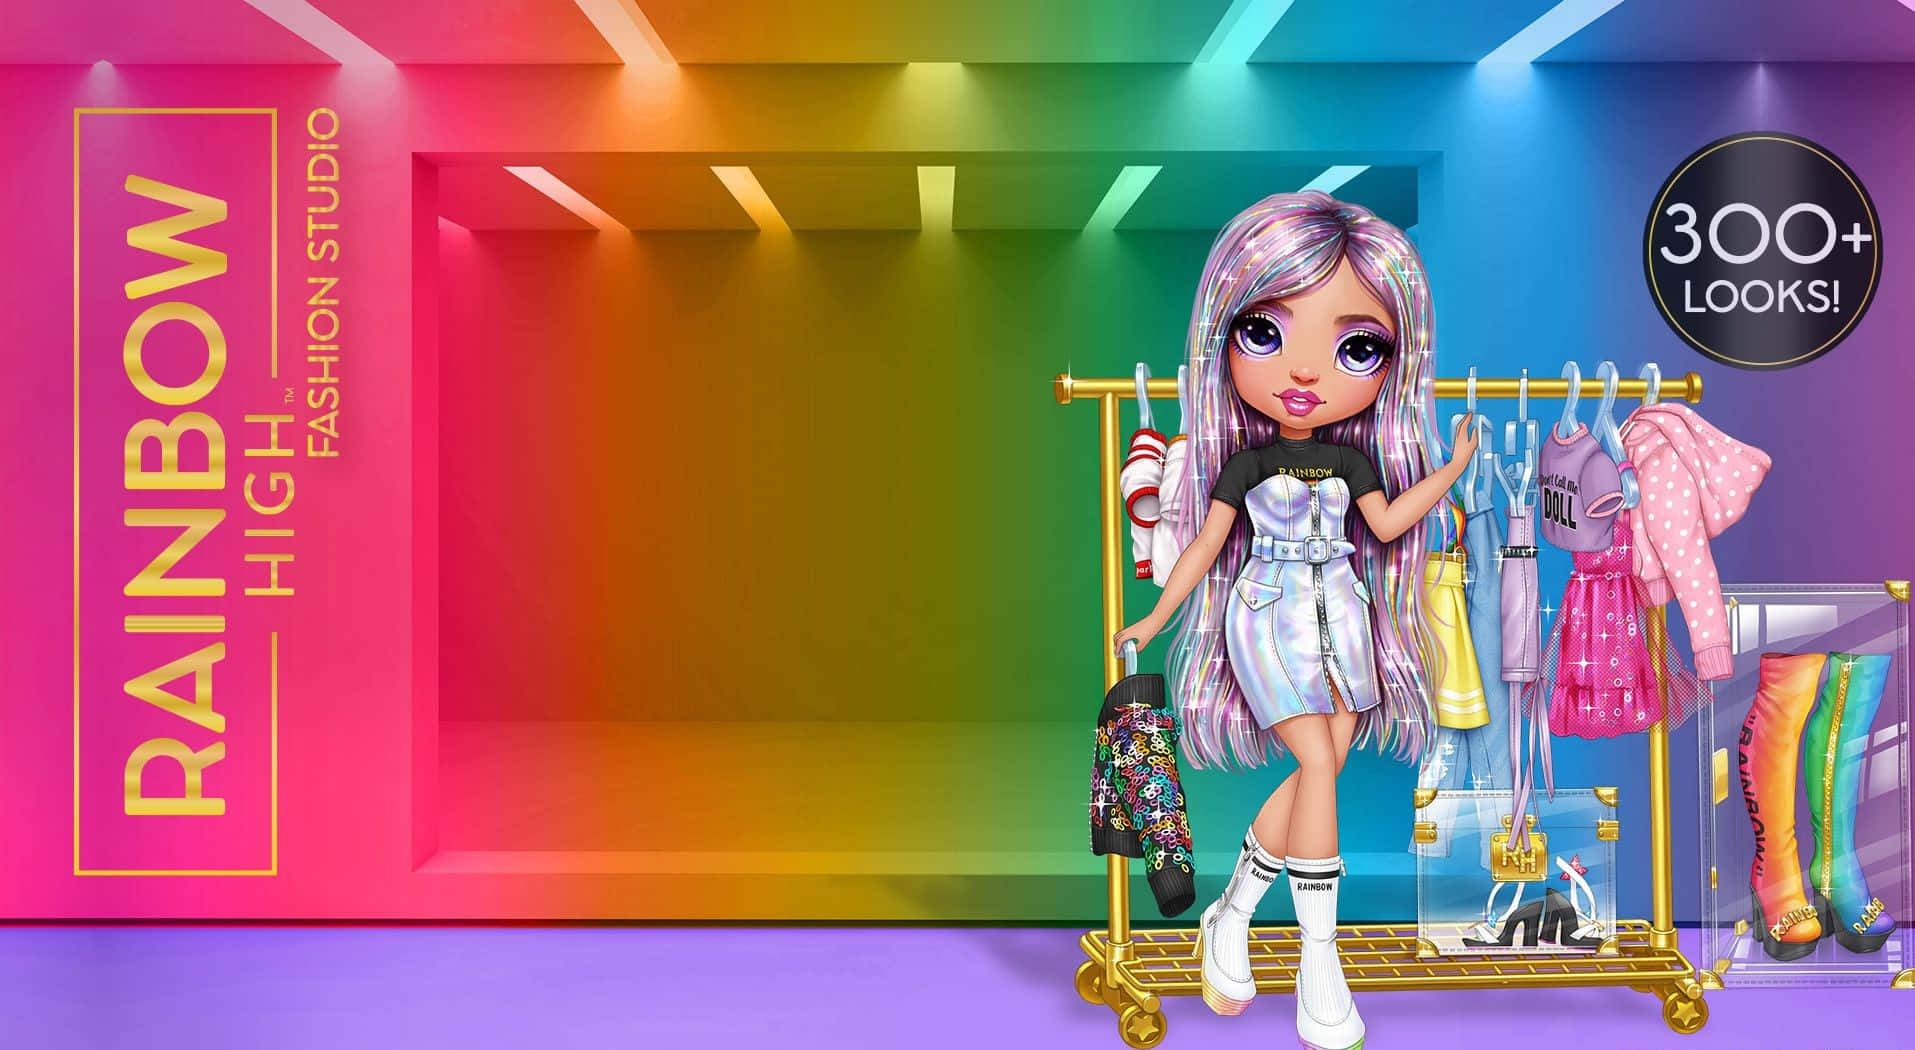 Discover an endless world of creativity, friendship and fun with Rainbow High! Wallpaper